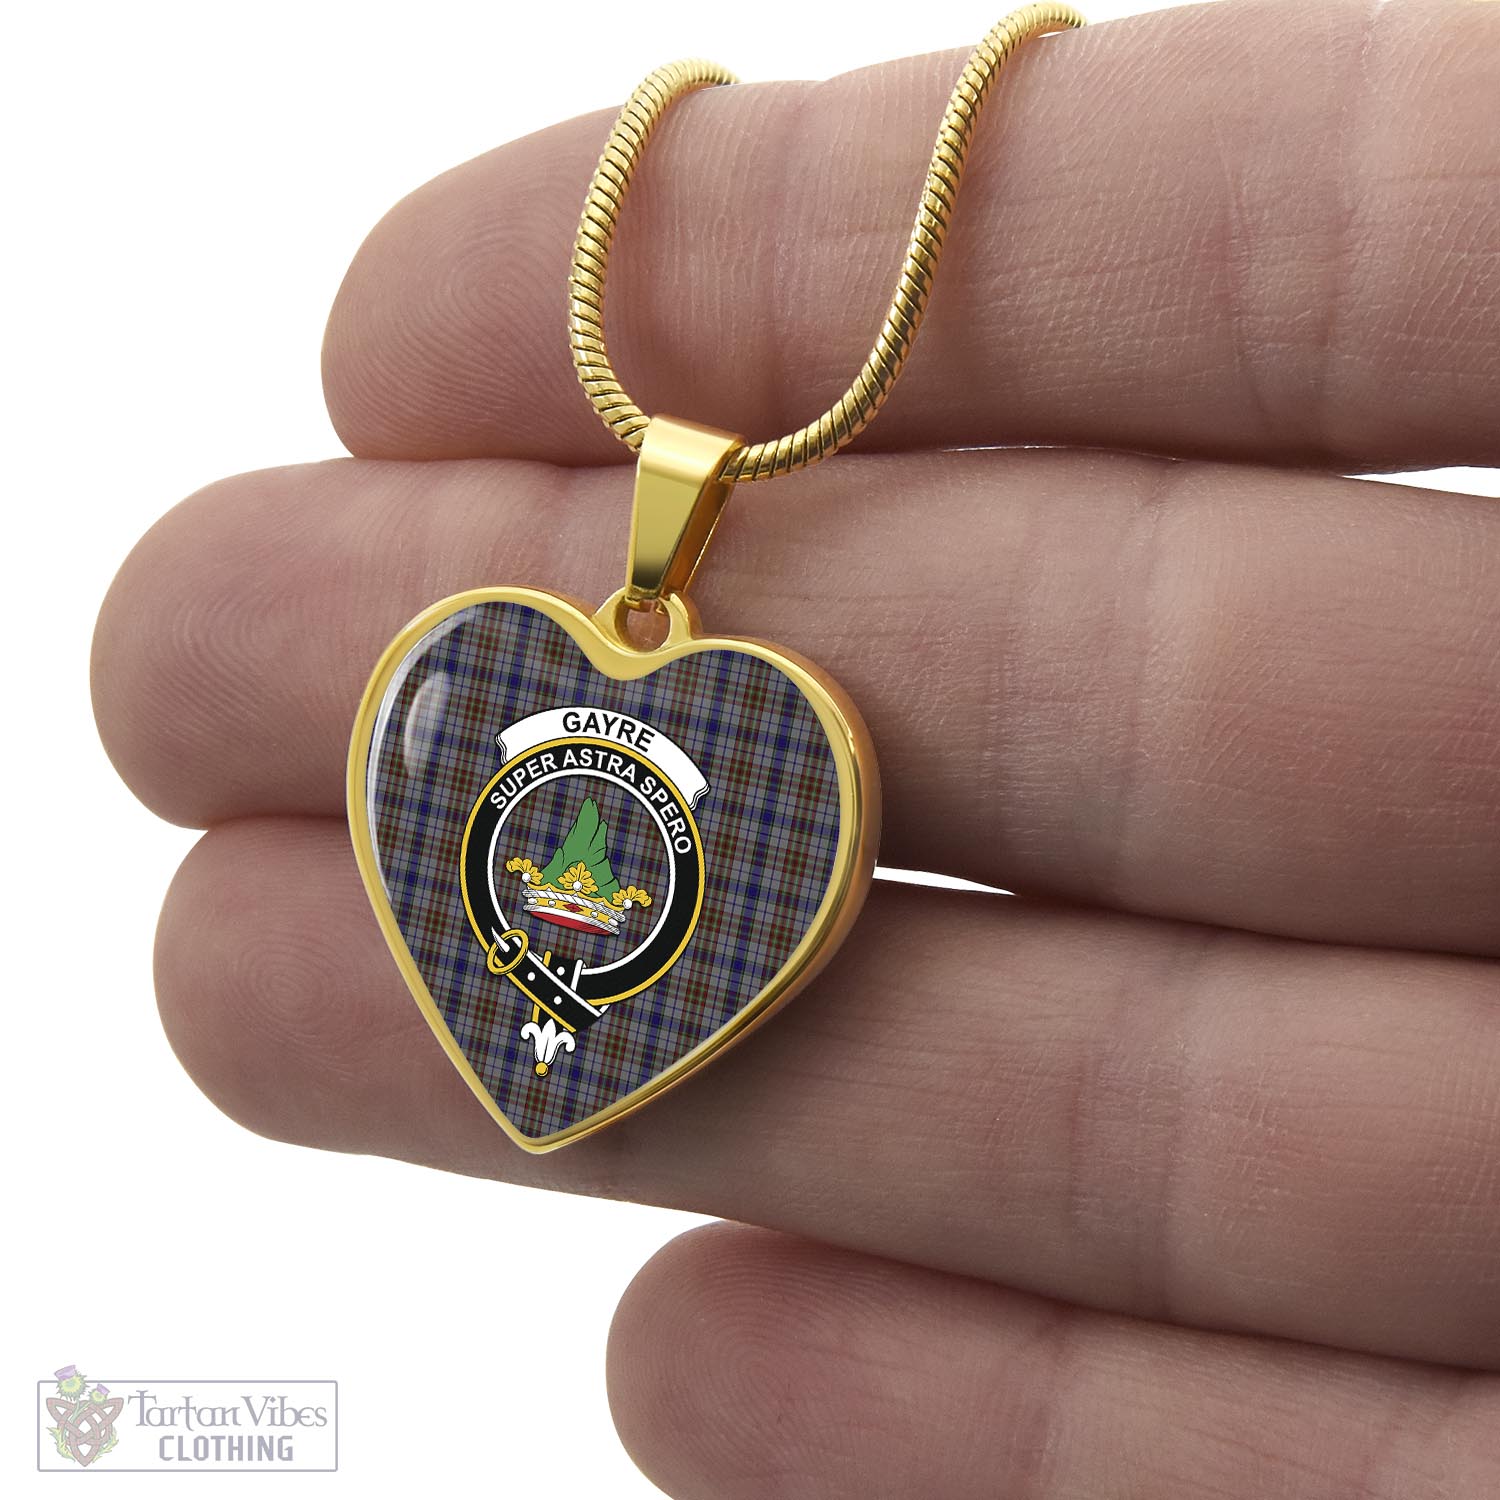 Tartan Vibes Clothing Gayre Hunting Tartan Heart Necklace with Family Crest